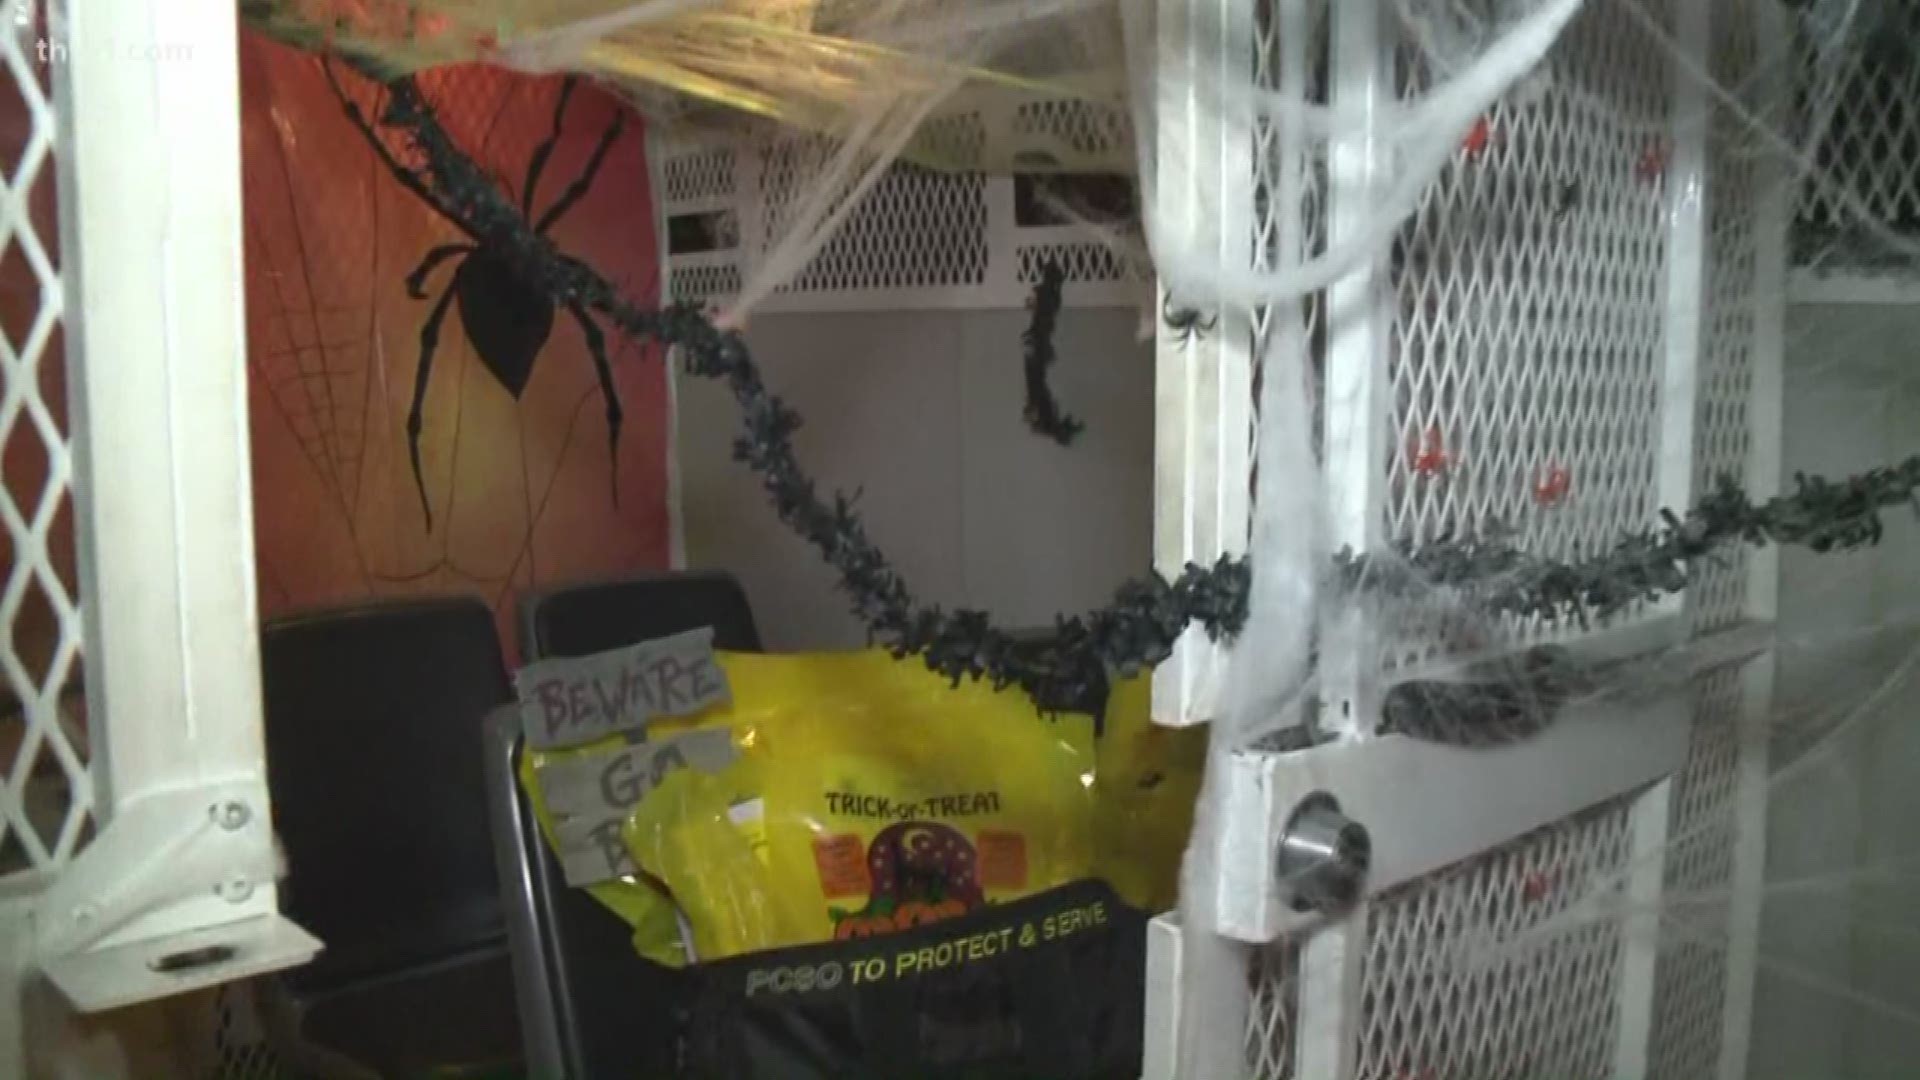 It's Halloween and the Pulaski County Sheriff's Office wants to make sure you and your kids stay safe tonight.